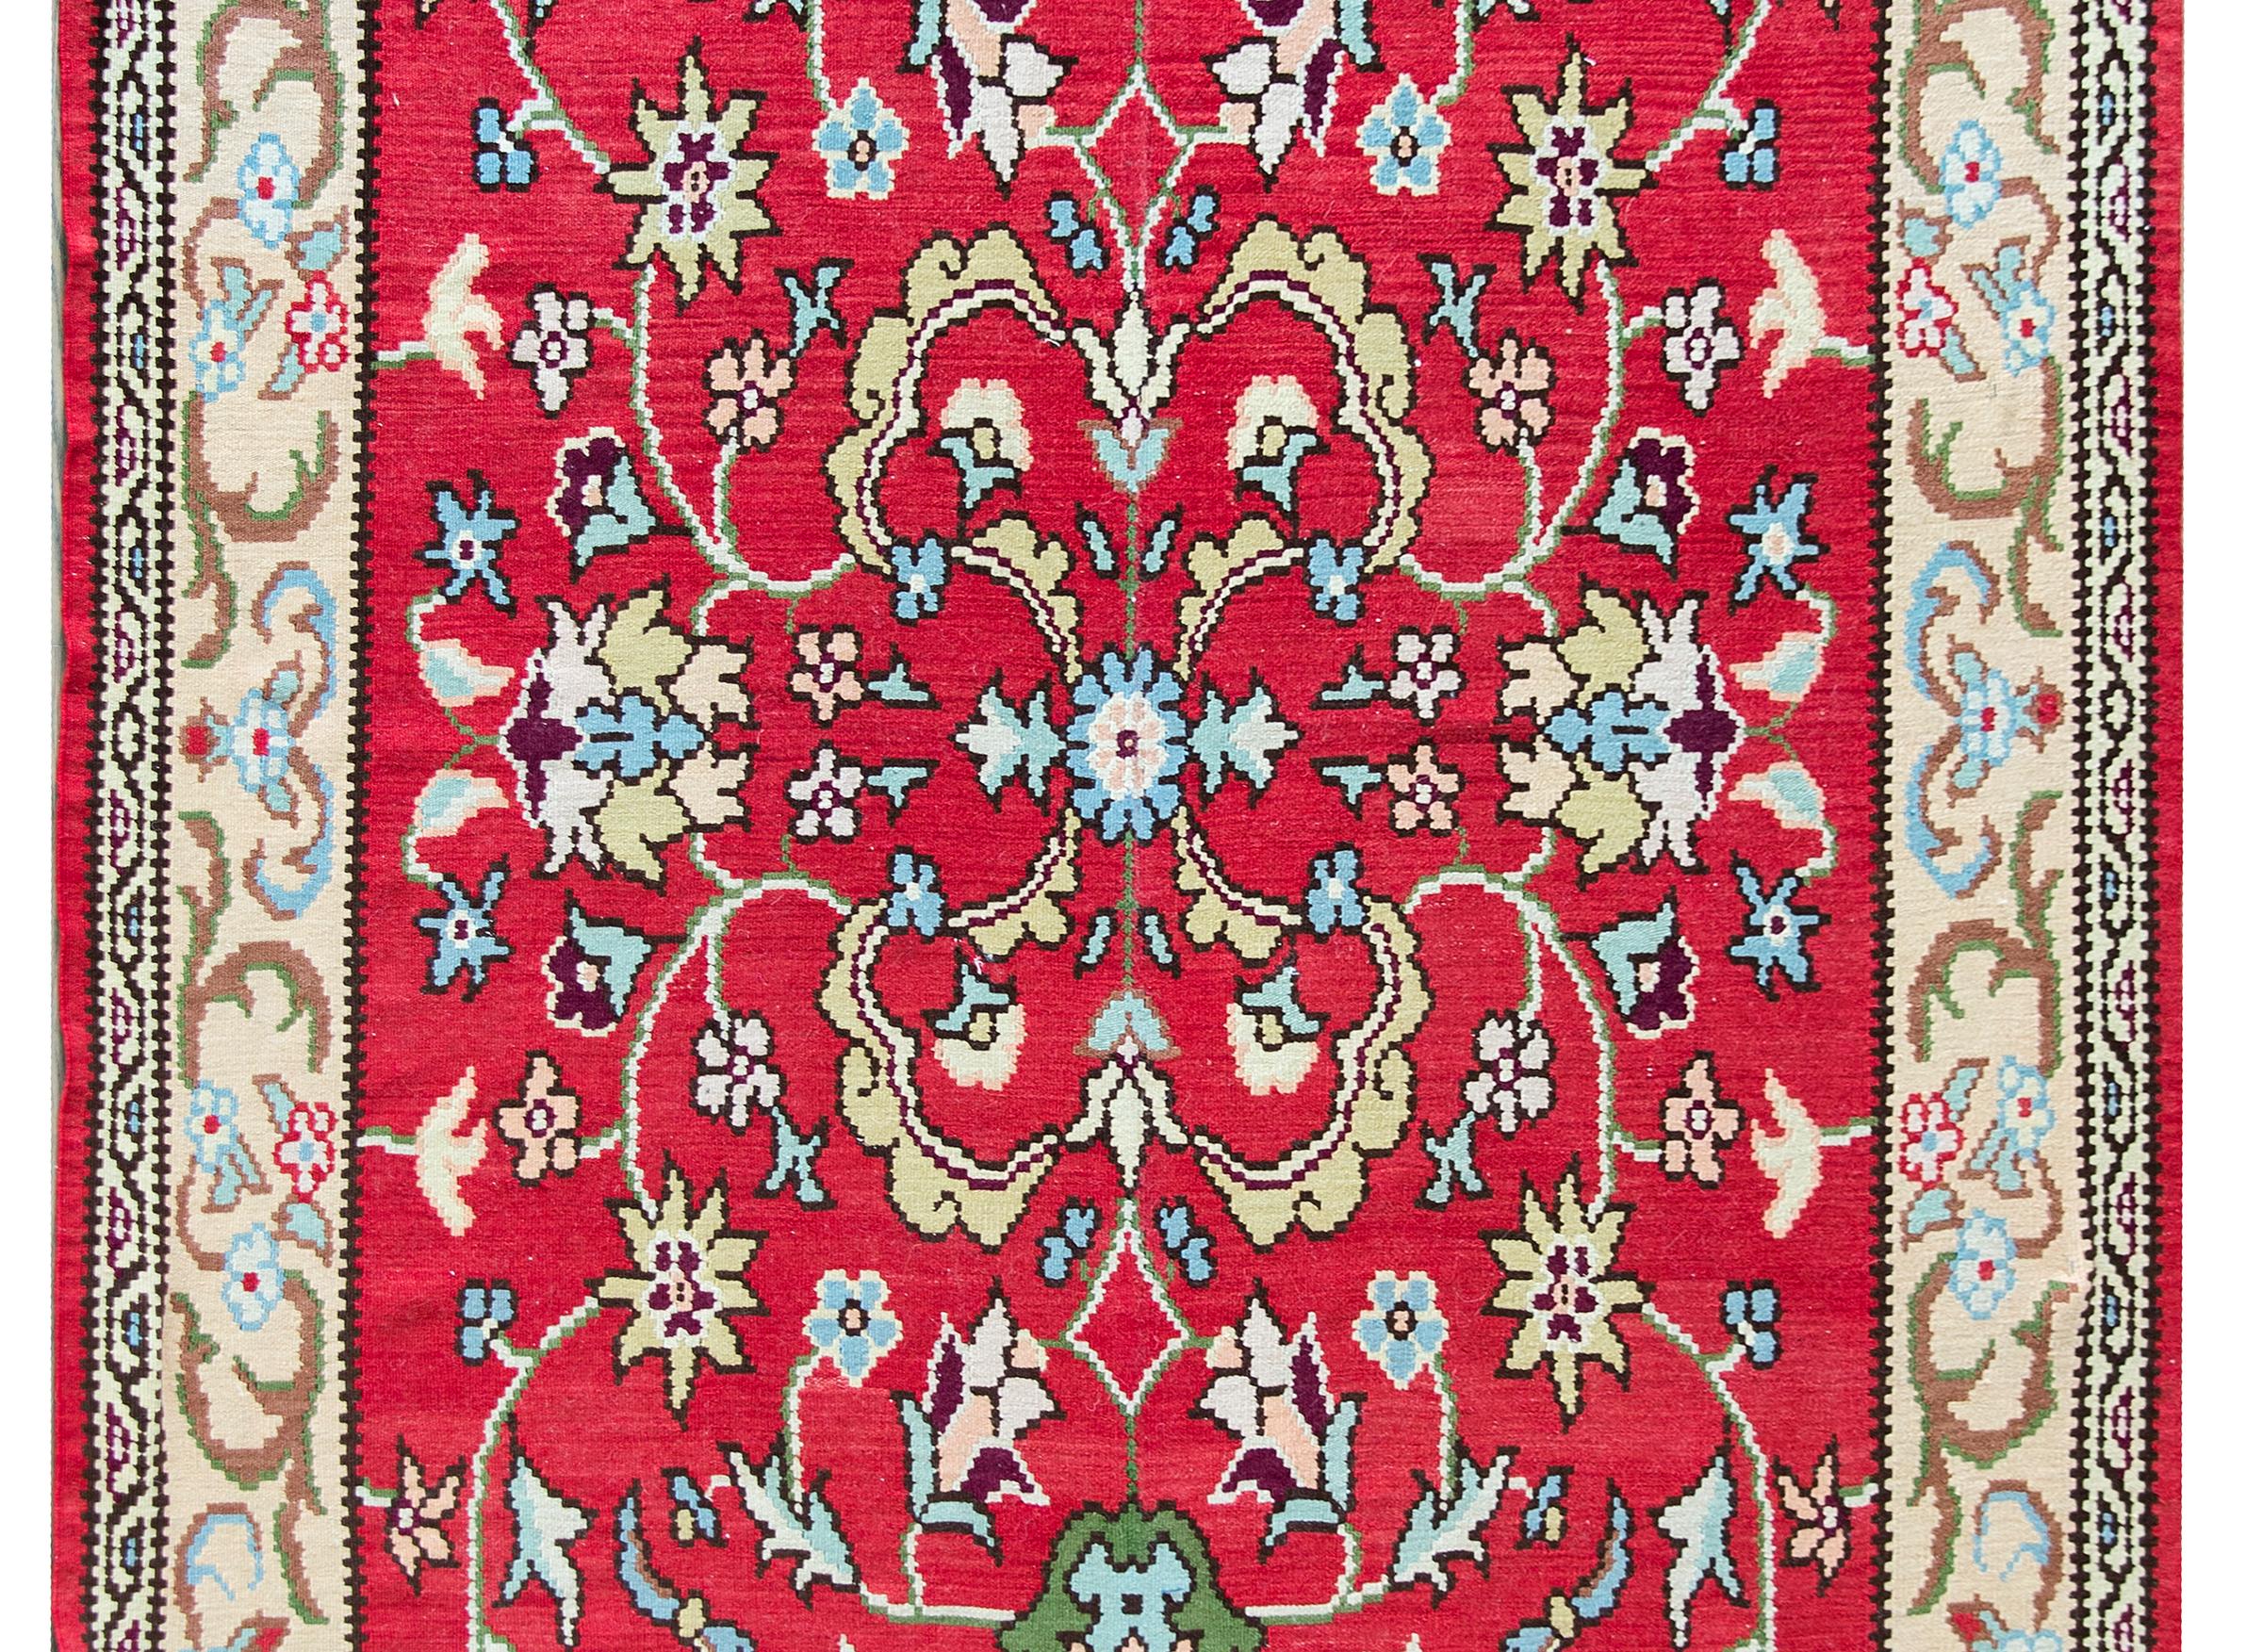 A vintage Turkish kilim rug with a wonderful mirrored floral pattern woven in light and dark indigo, green, gold and brown, set against a bold crimson background, and surrounded by a beautiful scrolling vine and floral patterned border.